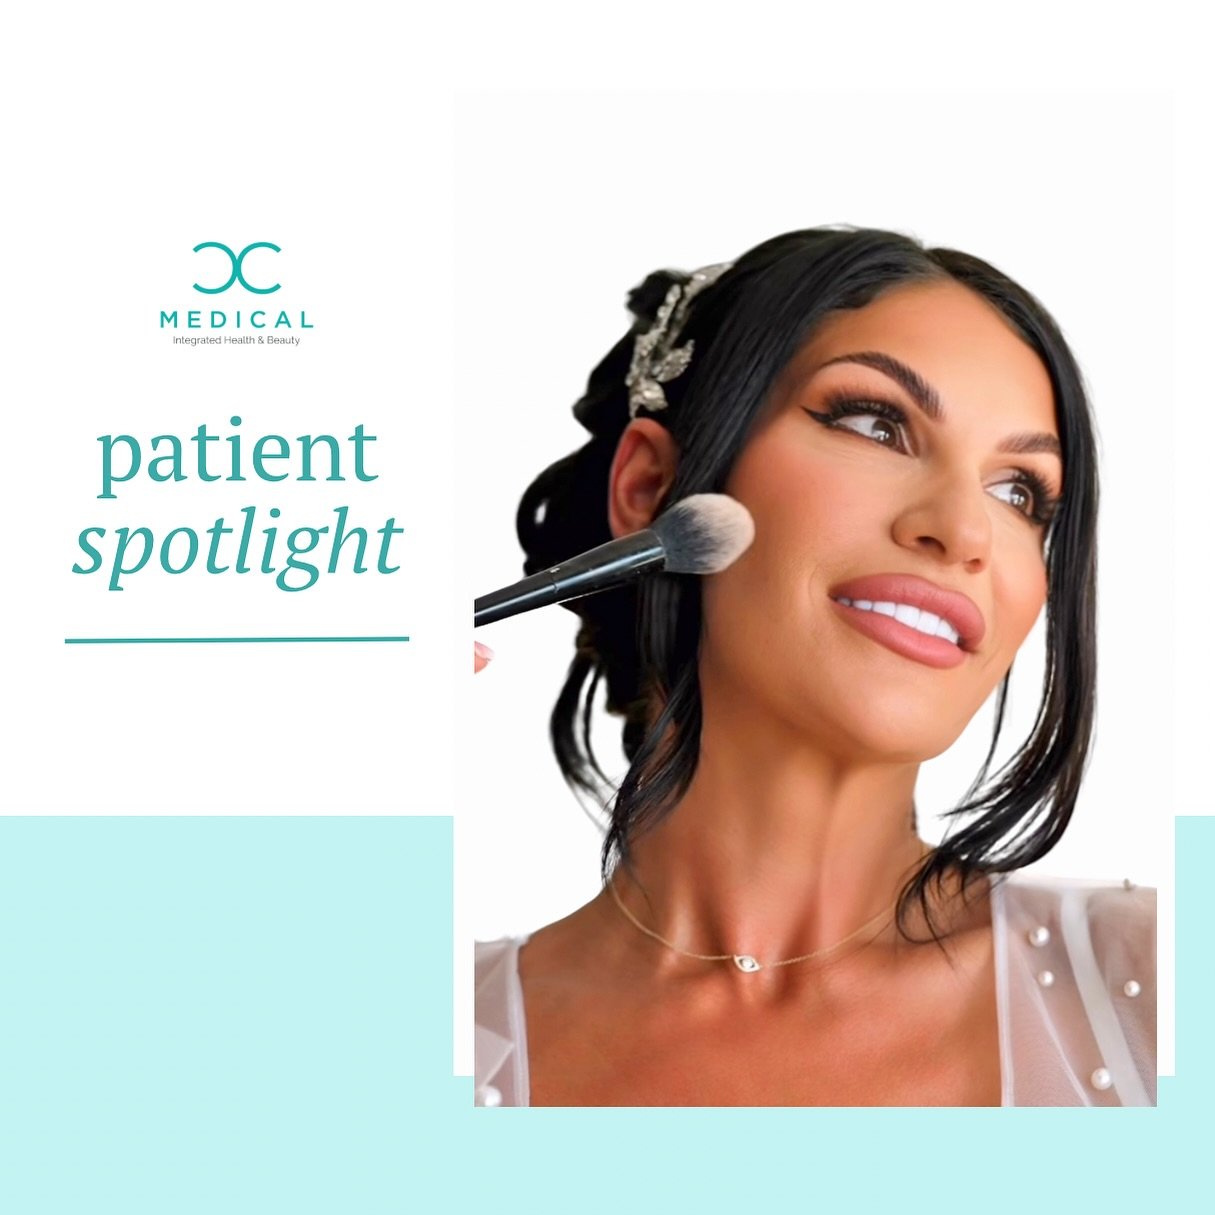 Congratulations to this bridal beauty! ✨💍 Darian came to CC Medical wanting to reduce the appearance of her neck bands and jowls to give her a boost of confidence when smiling in photos on her wedding day. 

By injecting botox in the platysmal bands